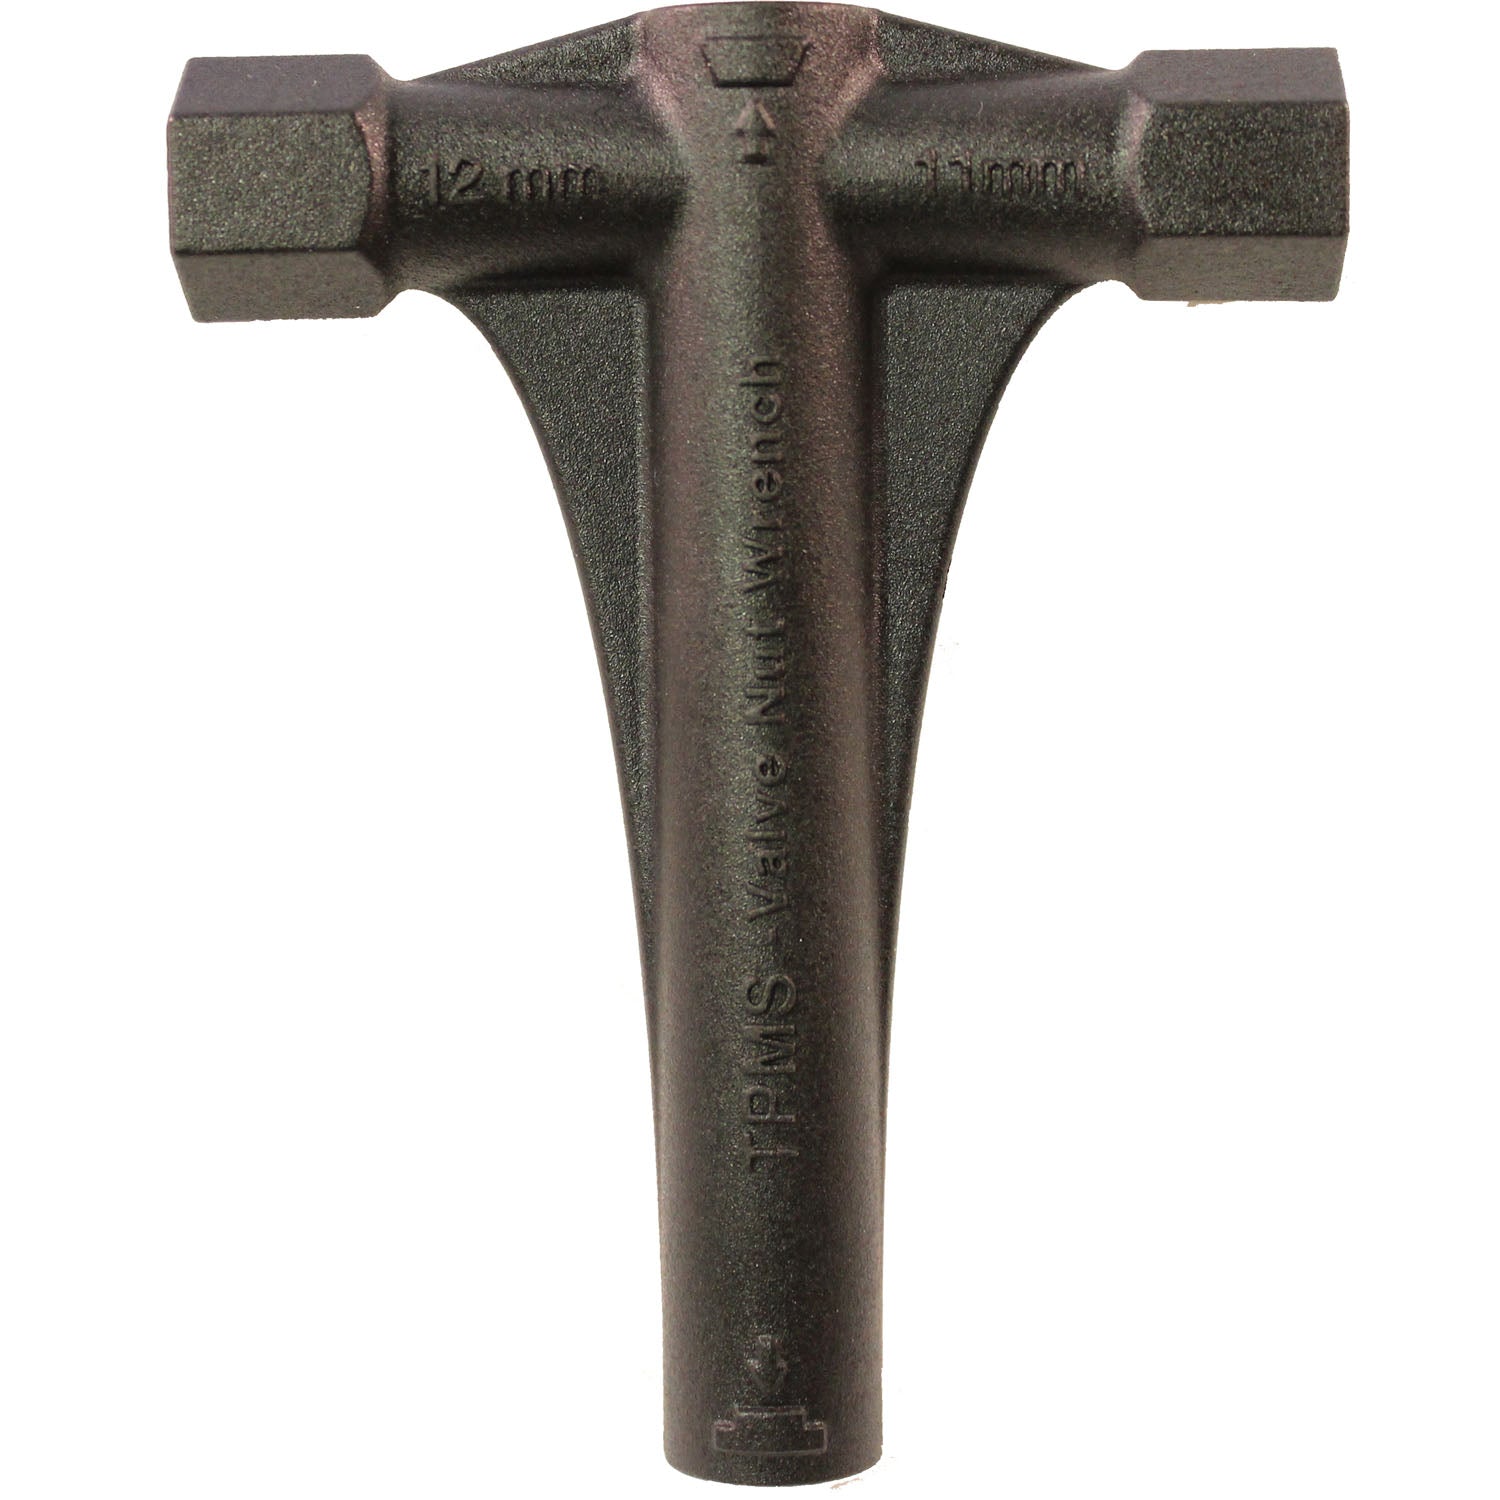 Dill 8911-10 TPMS 4 Way Grommet Seating and Valve Nut Removal Tool